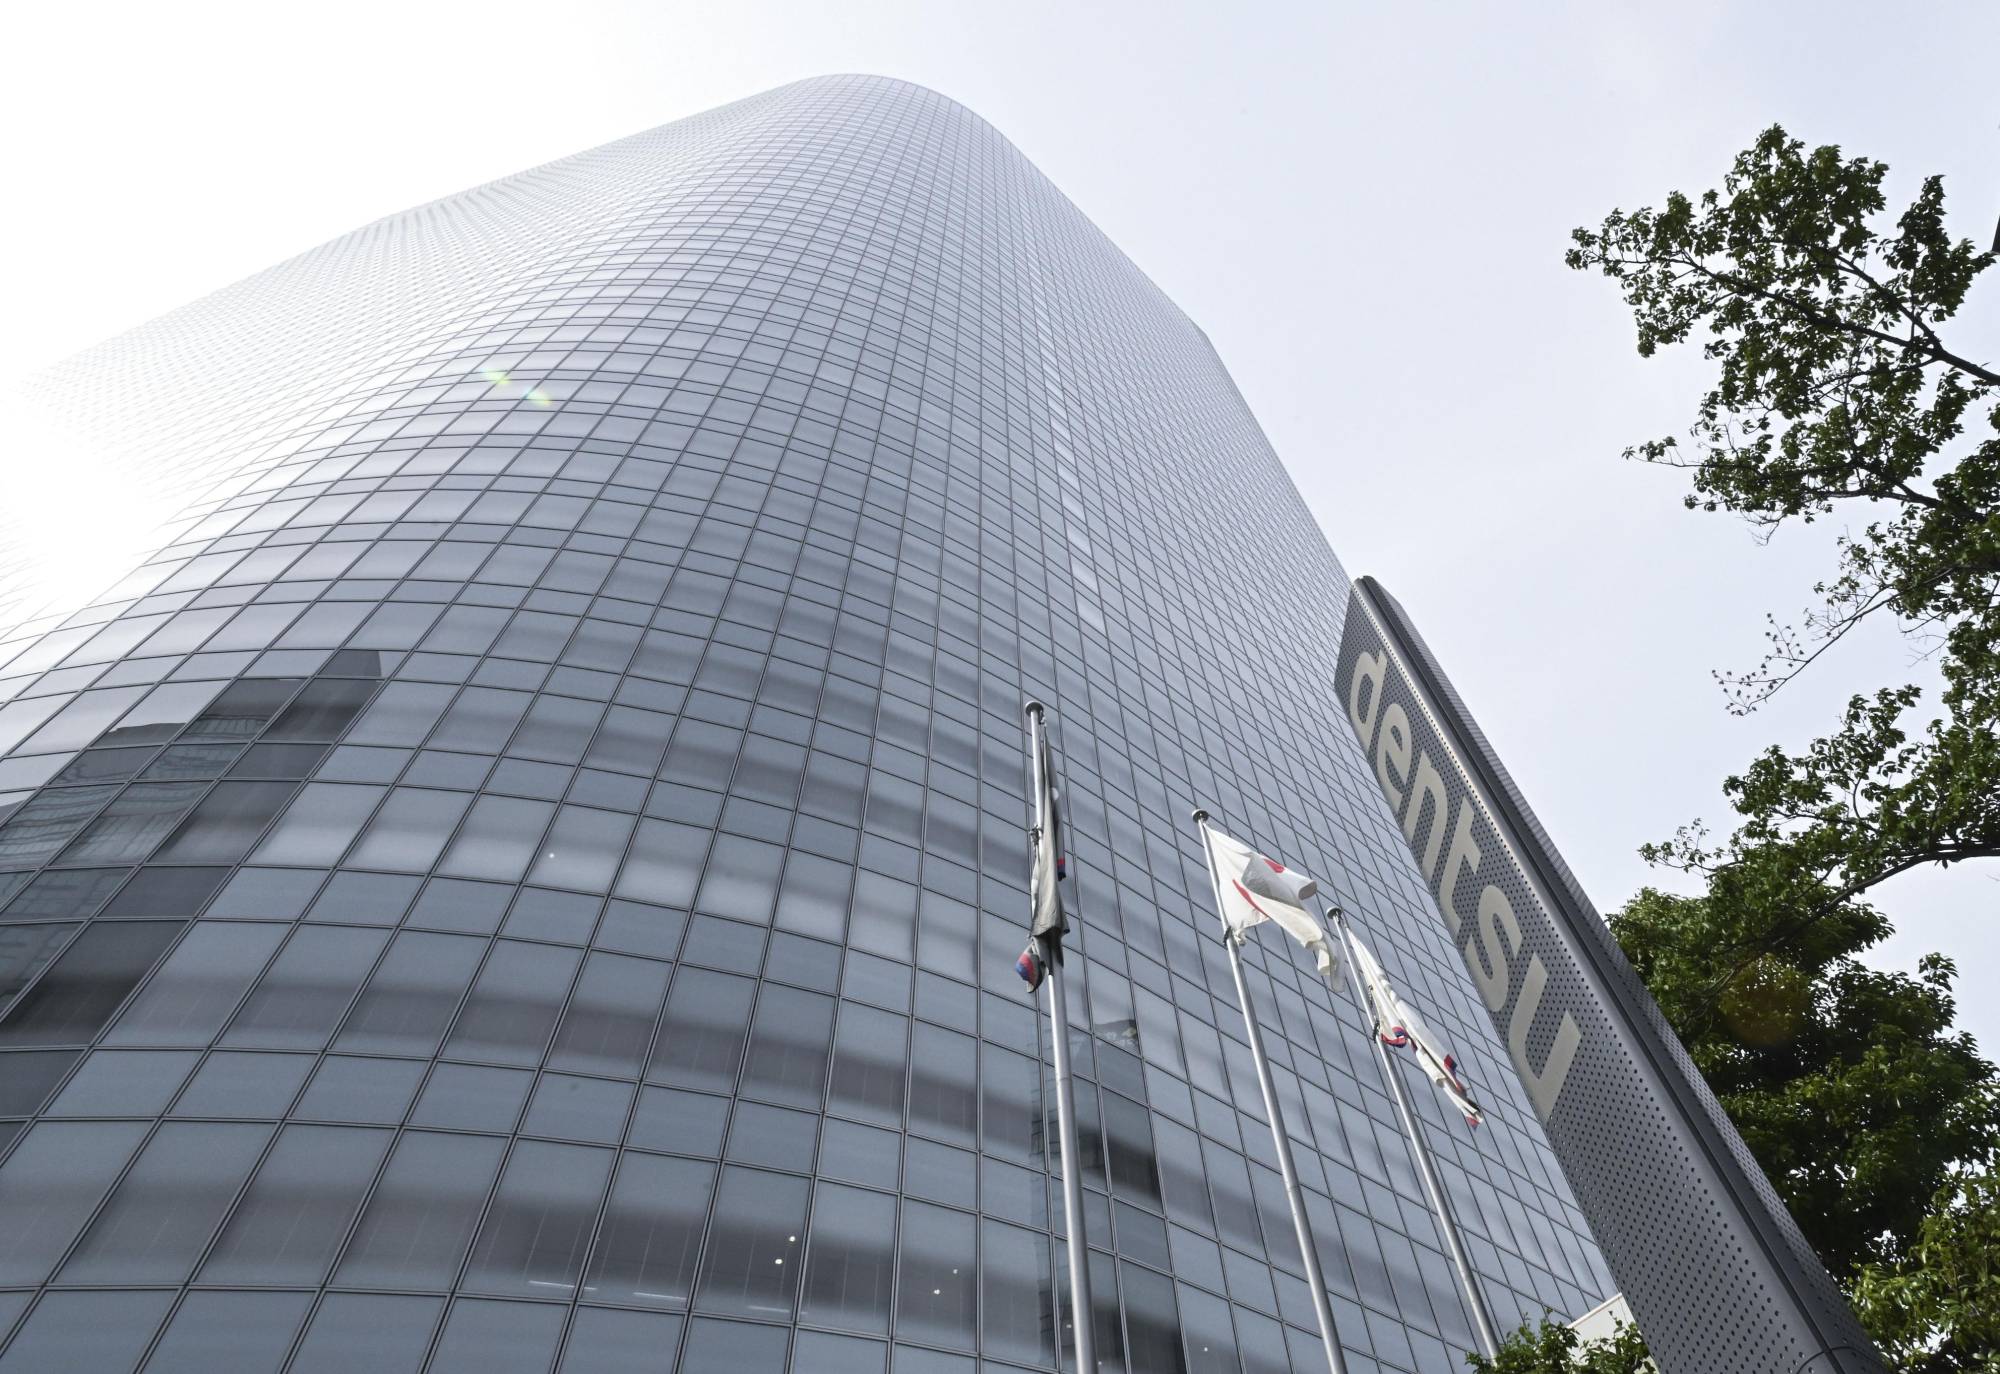 Advertising giant Dentsu Group Inc. is considering selling its 48-story headquarters building in Tokyo for some ¥300 billion ($2.9 billion), | KYODO